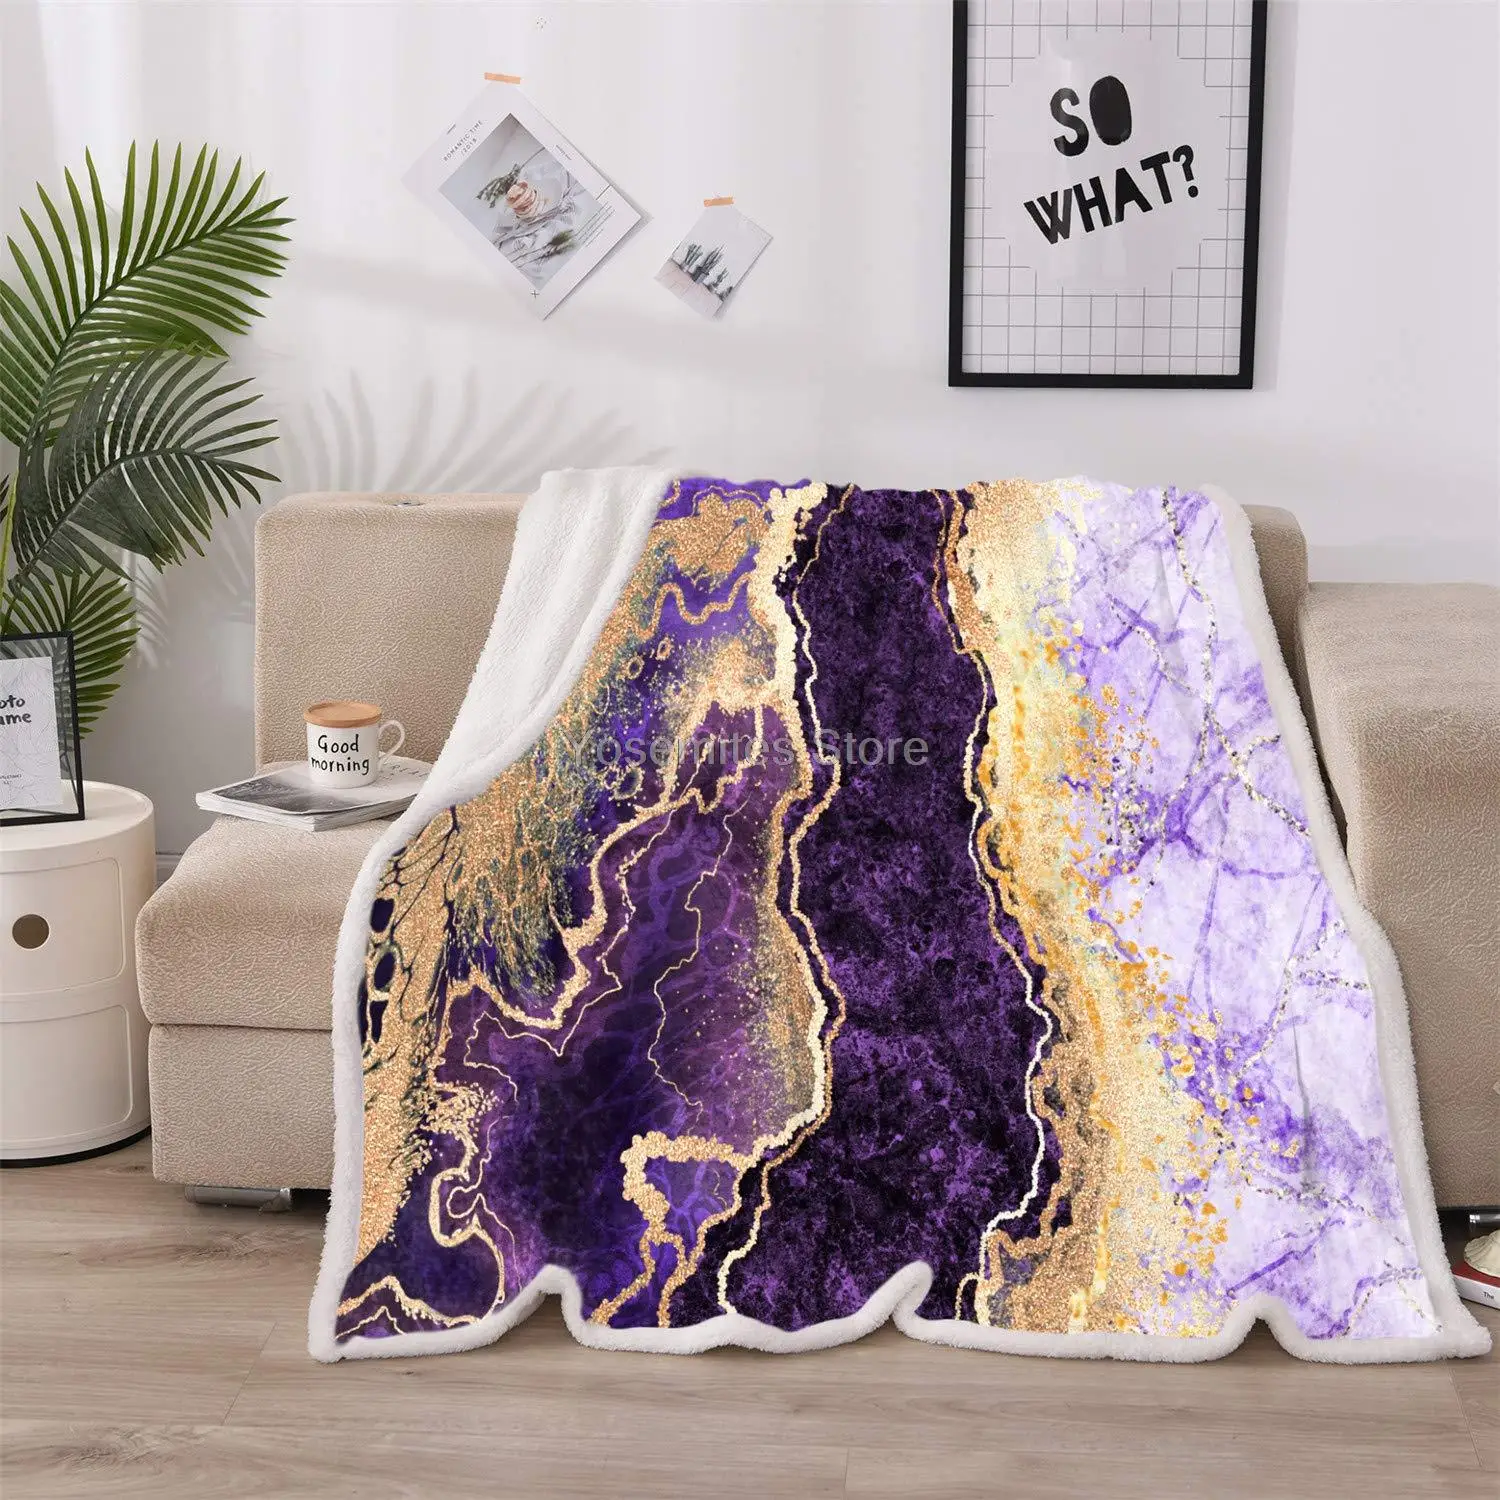 Holawakaka Marble Blanket Throw Twin Size, Luxury Super Soft Cozy Sherpa Fleece Throw for Bed Sofa Couch Travel (Purple, 60